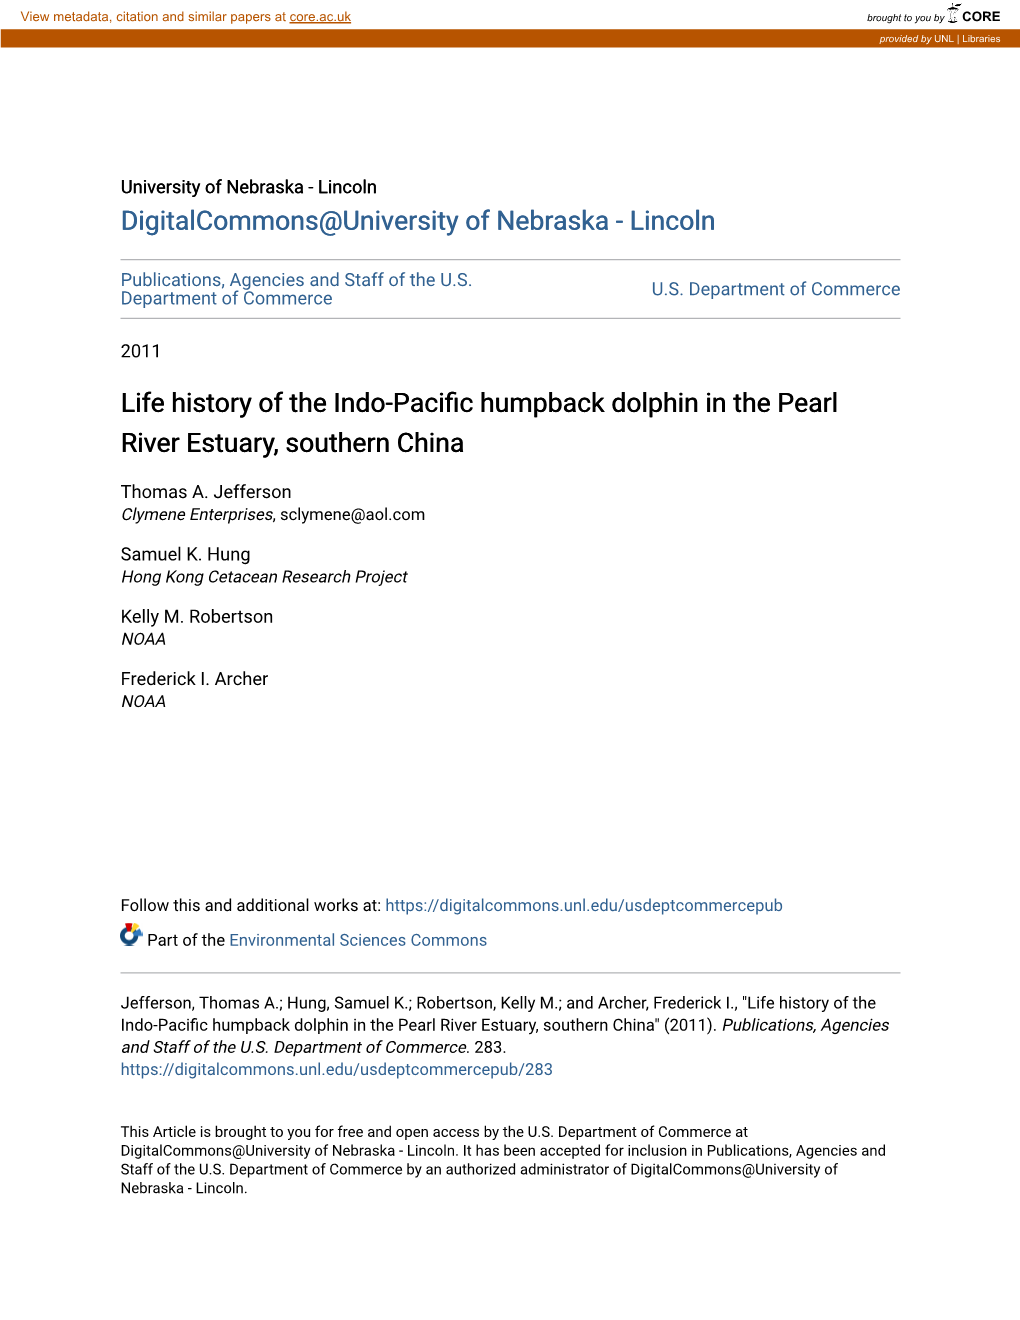 Life History of the Indo-Pacific Humpback Dolphin in the Pearl